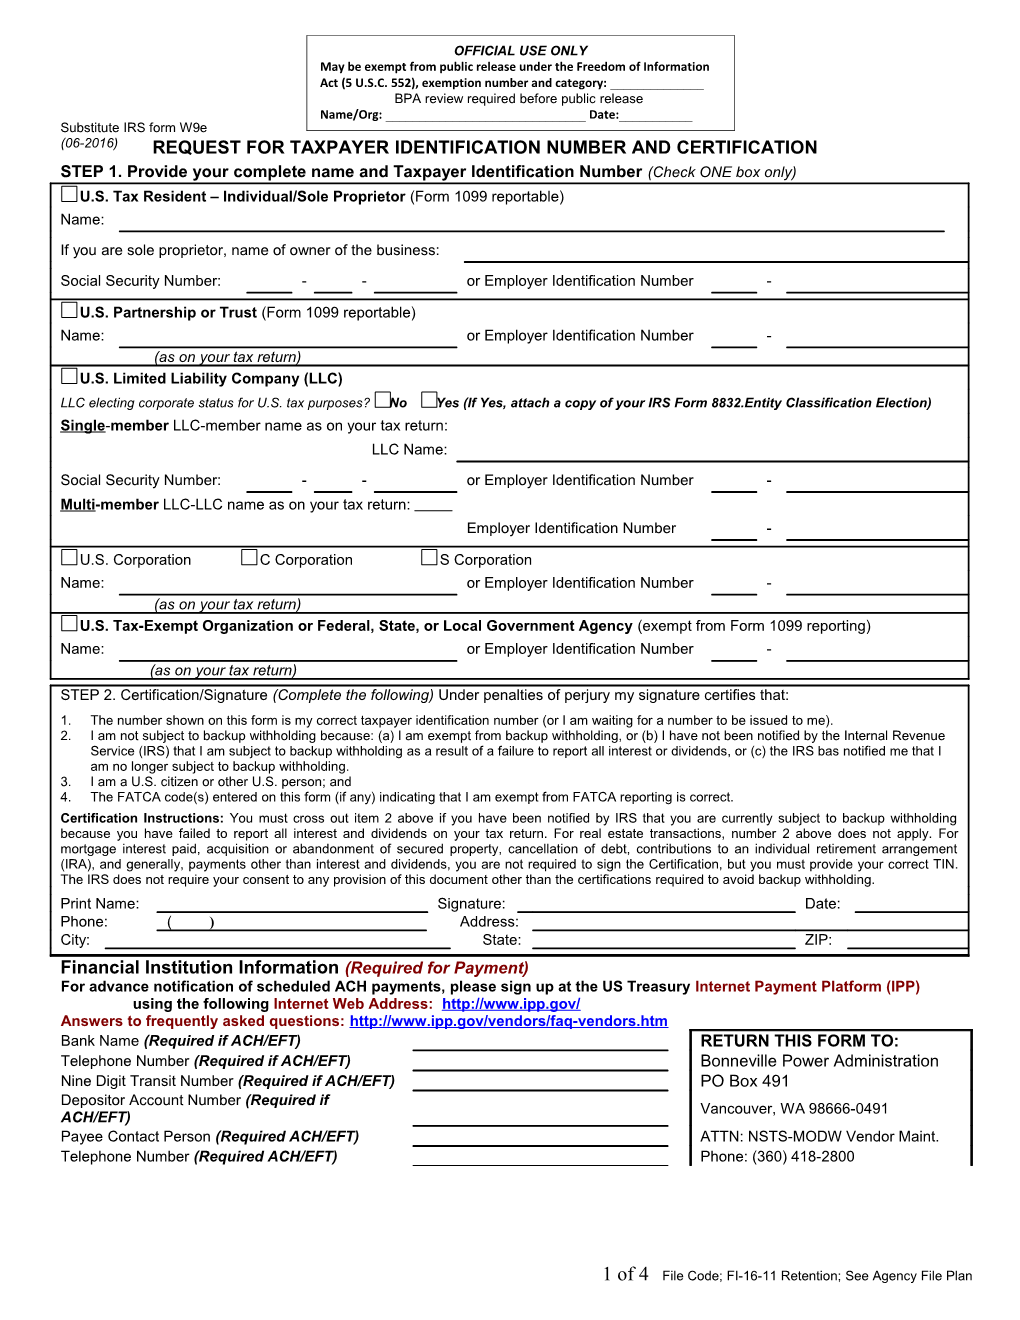 Request for Taxpayer ID Number and Certification - New Vendor Profile Request - Form